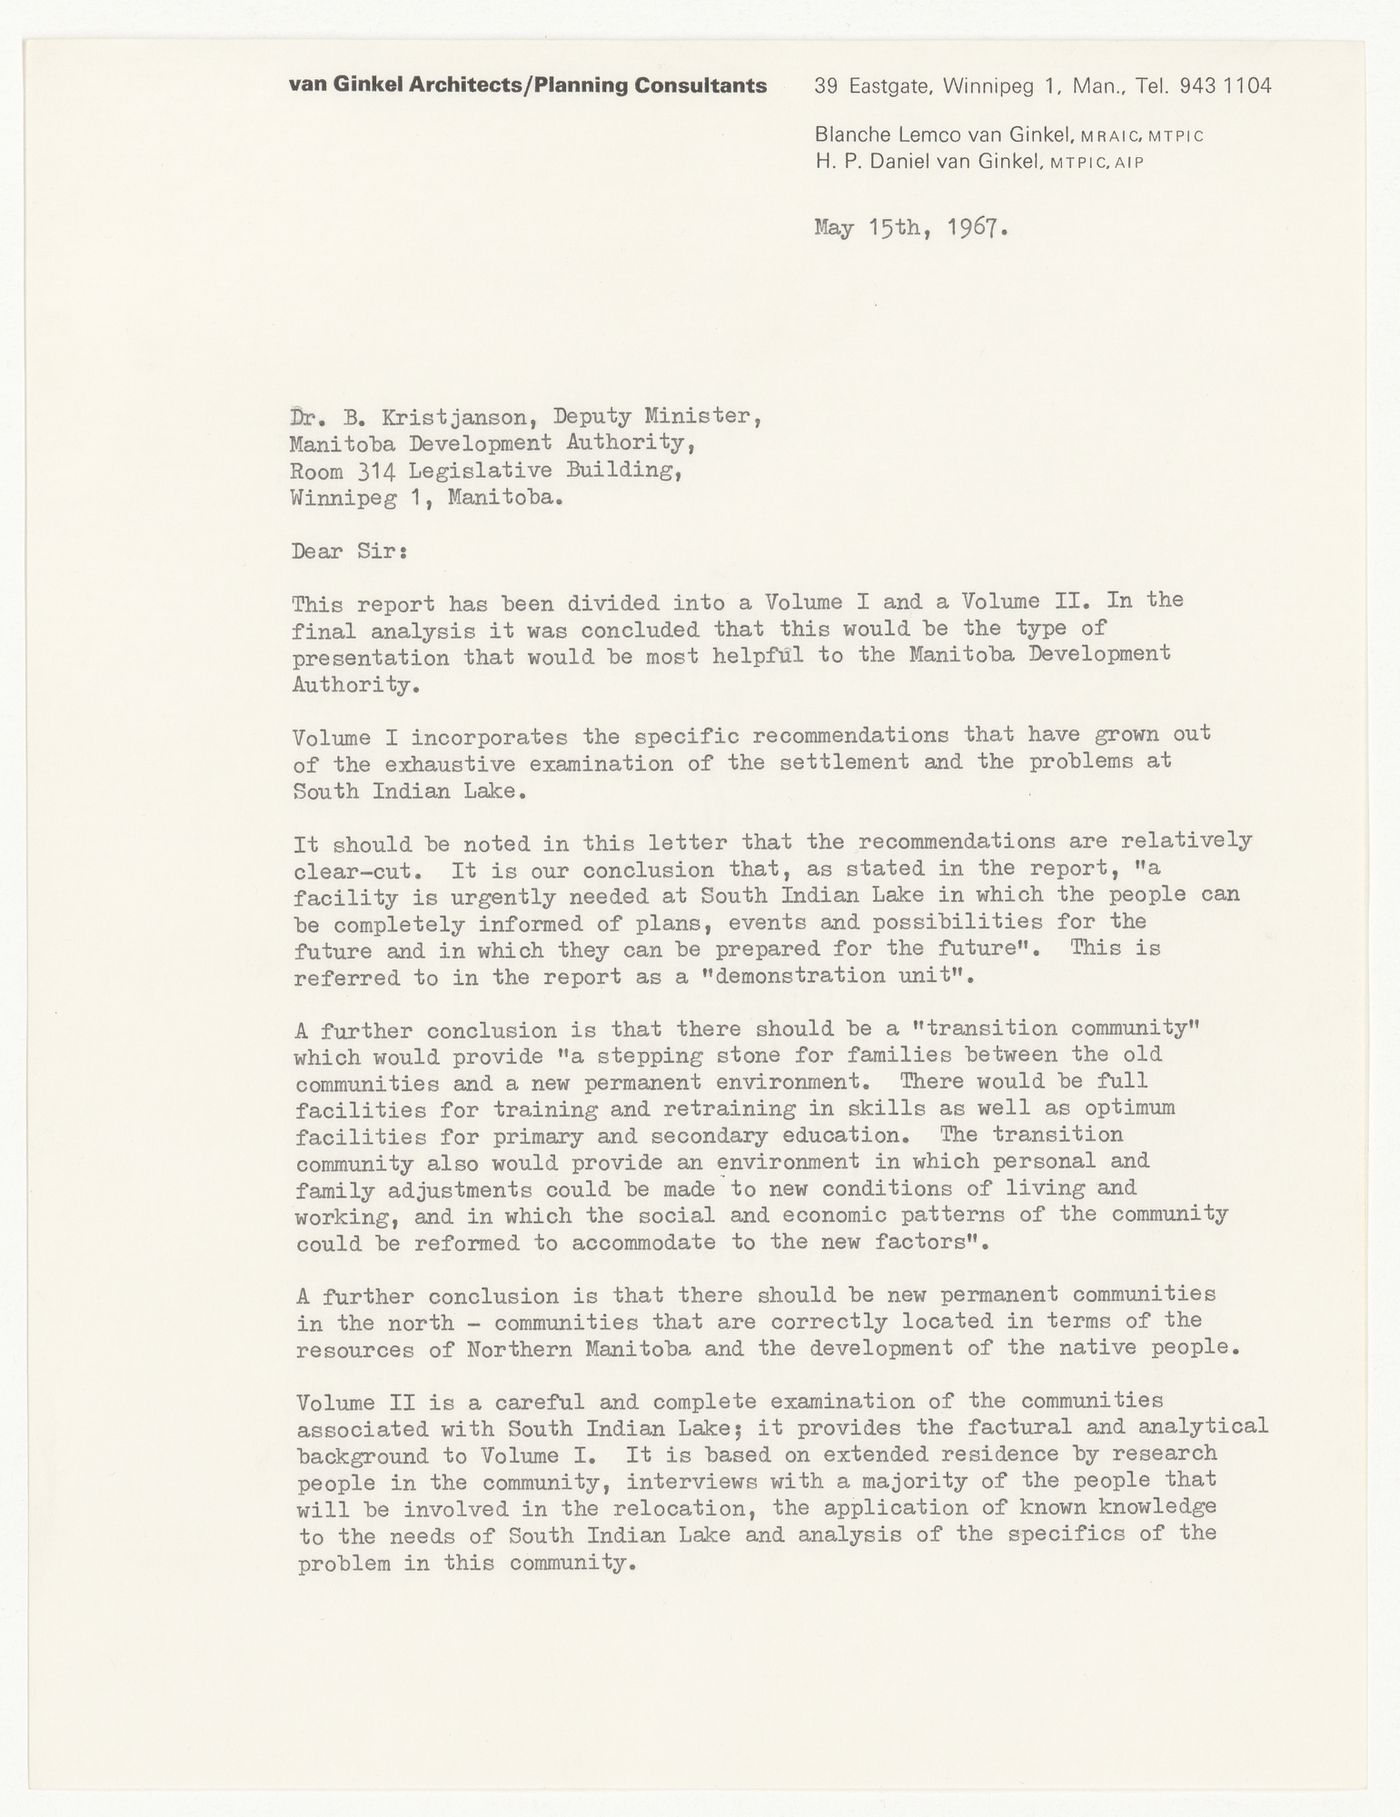 Letter from H. P. Daniel van Ginkel and Ralph Hedlin to Manitoba Development Authority for South Indian Lake, Manitoba